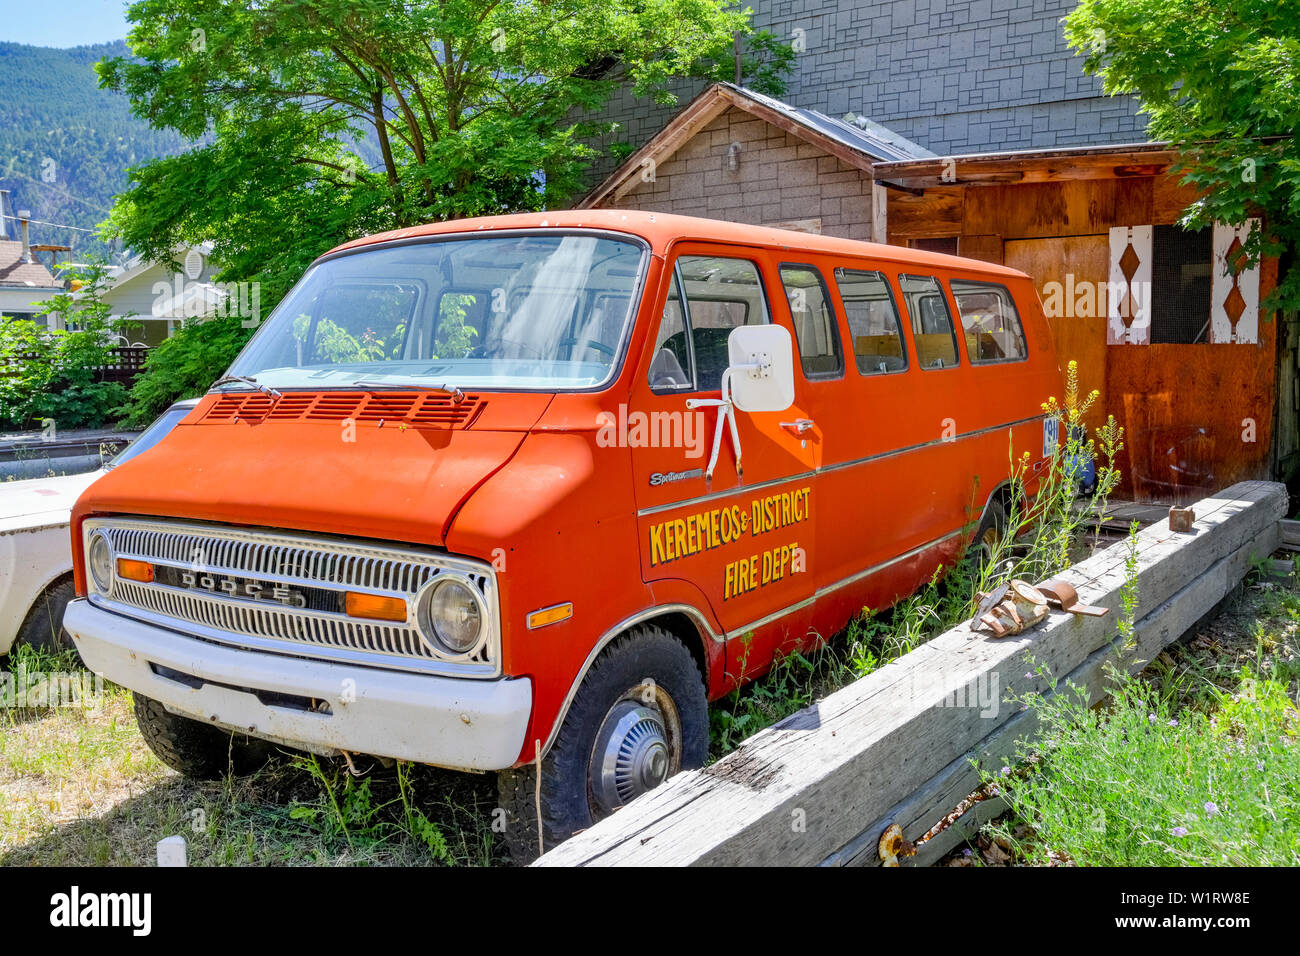 Dodge Van High Resolution Stock Photography and Images - Alamy